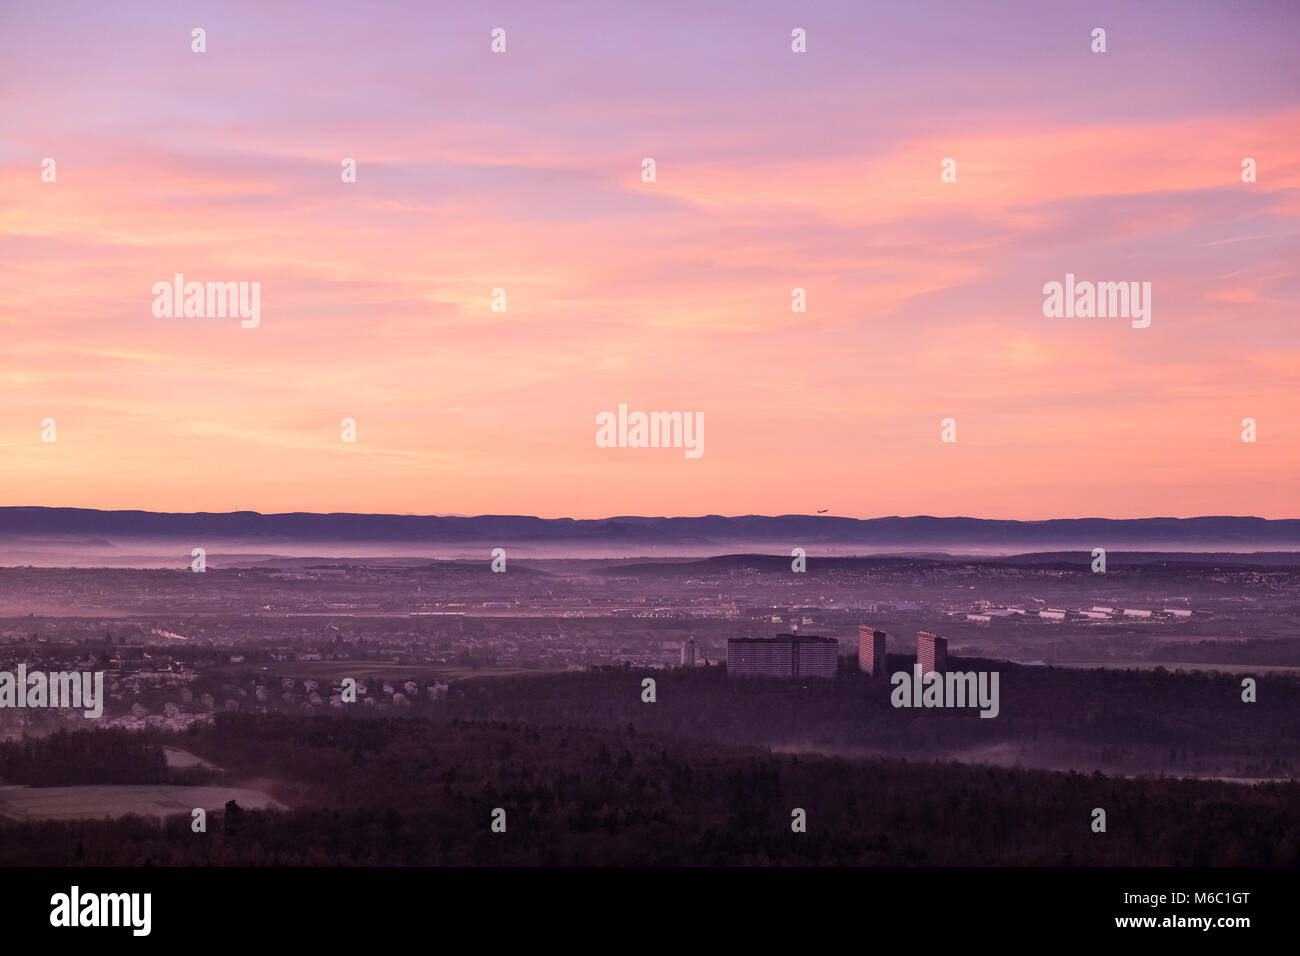 Aerial view of the city of Stuttgart towards the swabian alb with an airplane starting in a beautiful morning sunrise as seen from the tv tower (Fernsehturm) of the city. Stock Photo